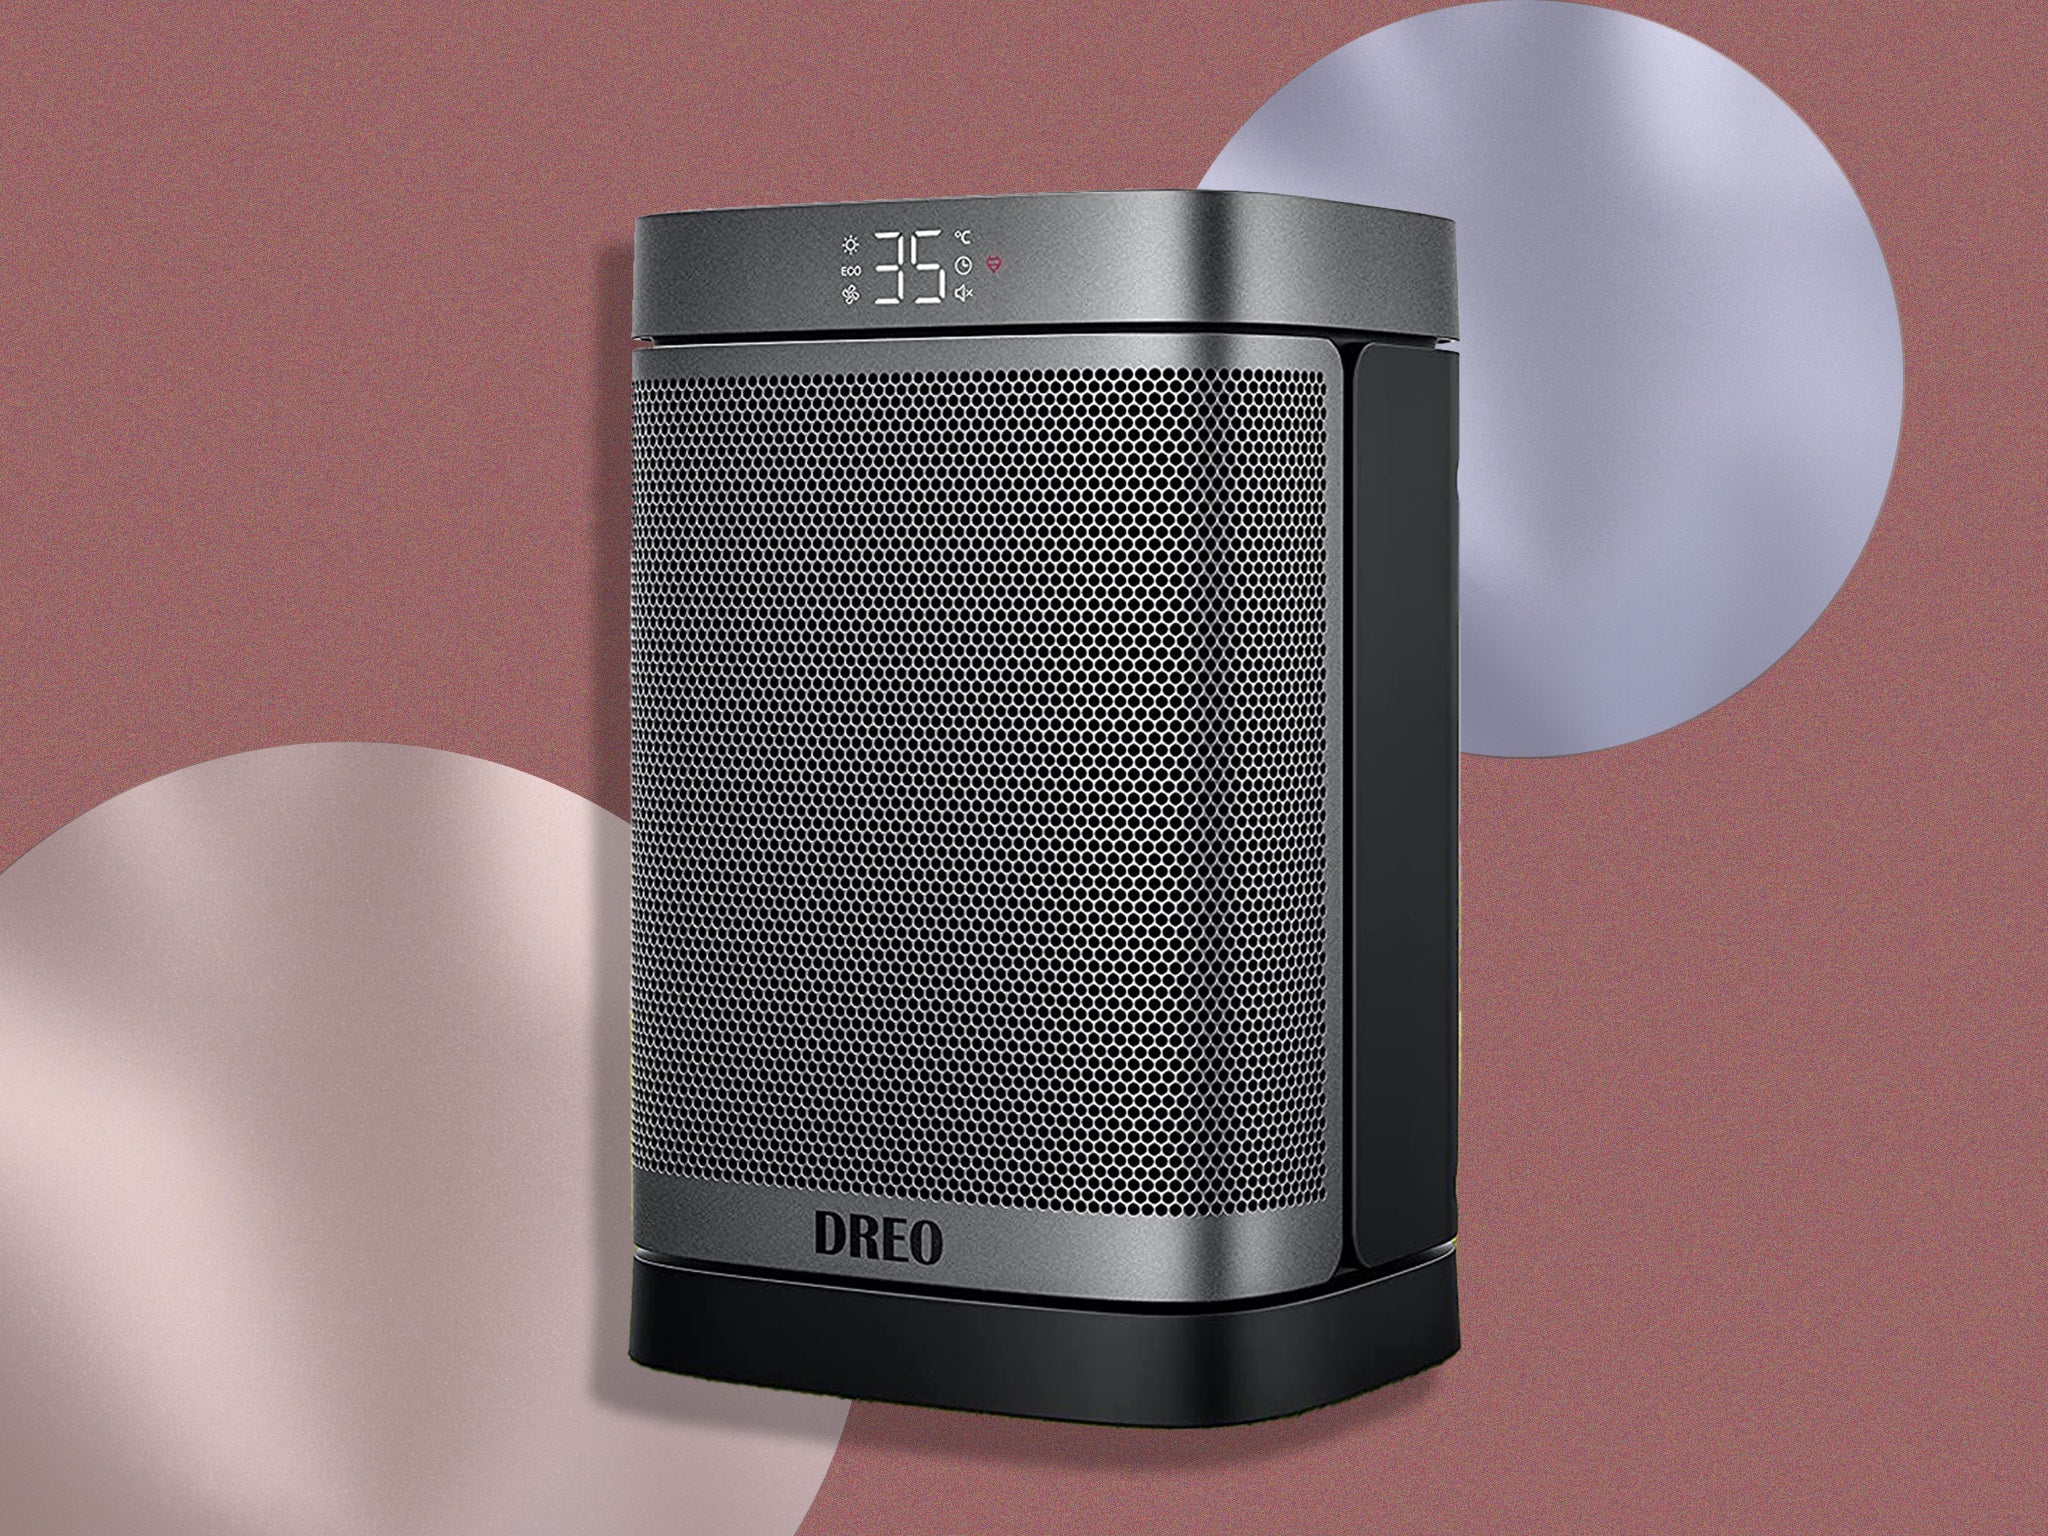 The atom one also features 70-degree oscillation, to spread heat around the room